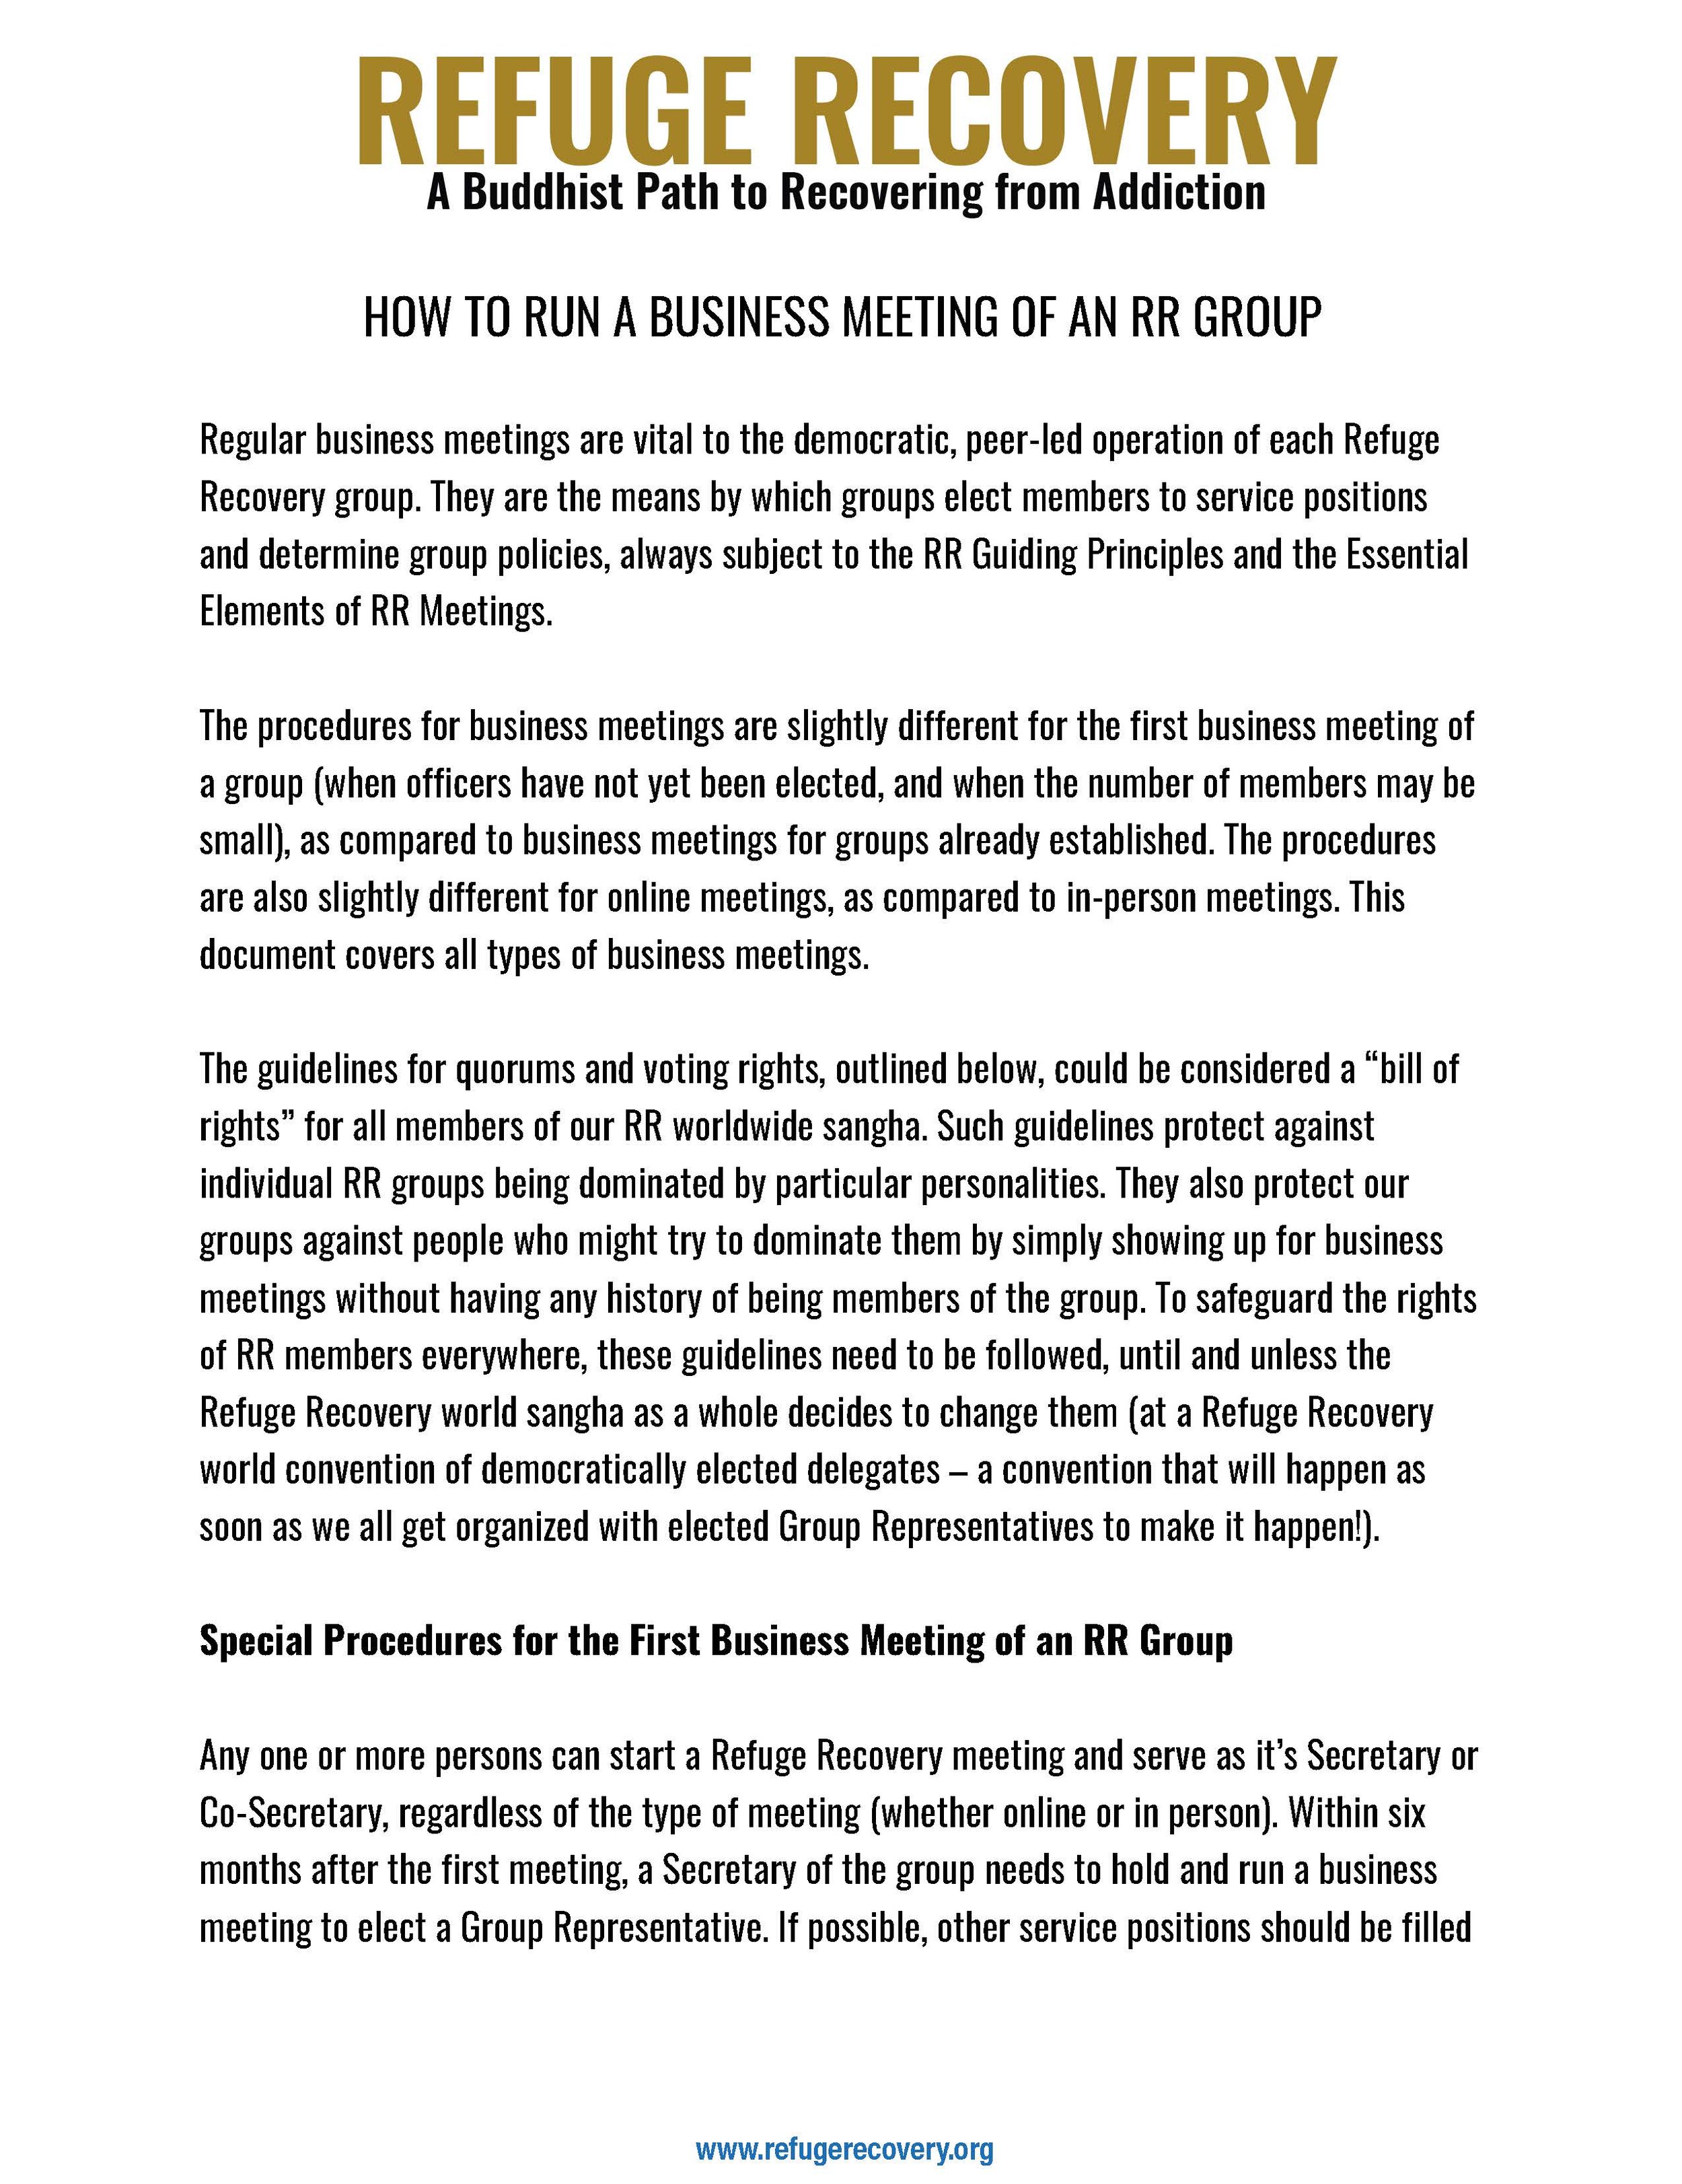 HOW TO RUN A BUSINESS MEETING OF AN RR GROUP_Page_1.jpg